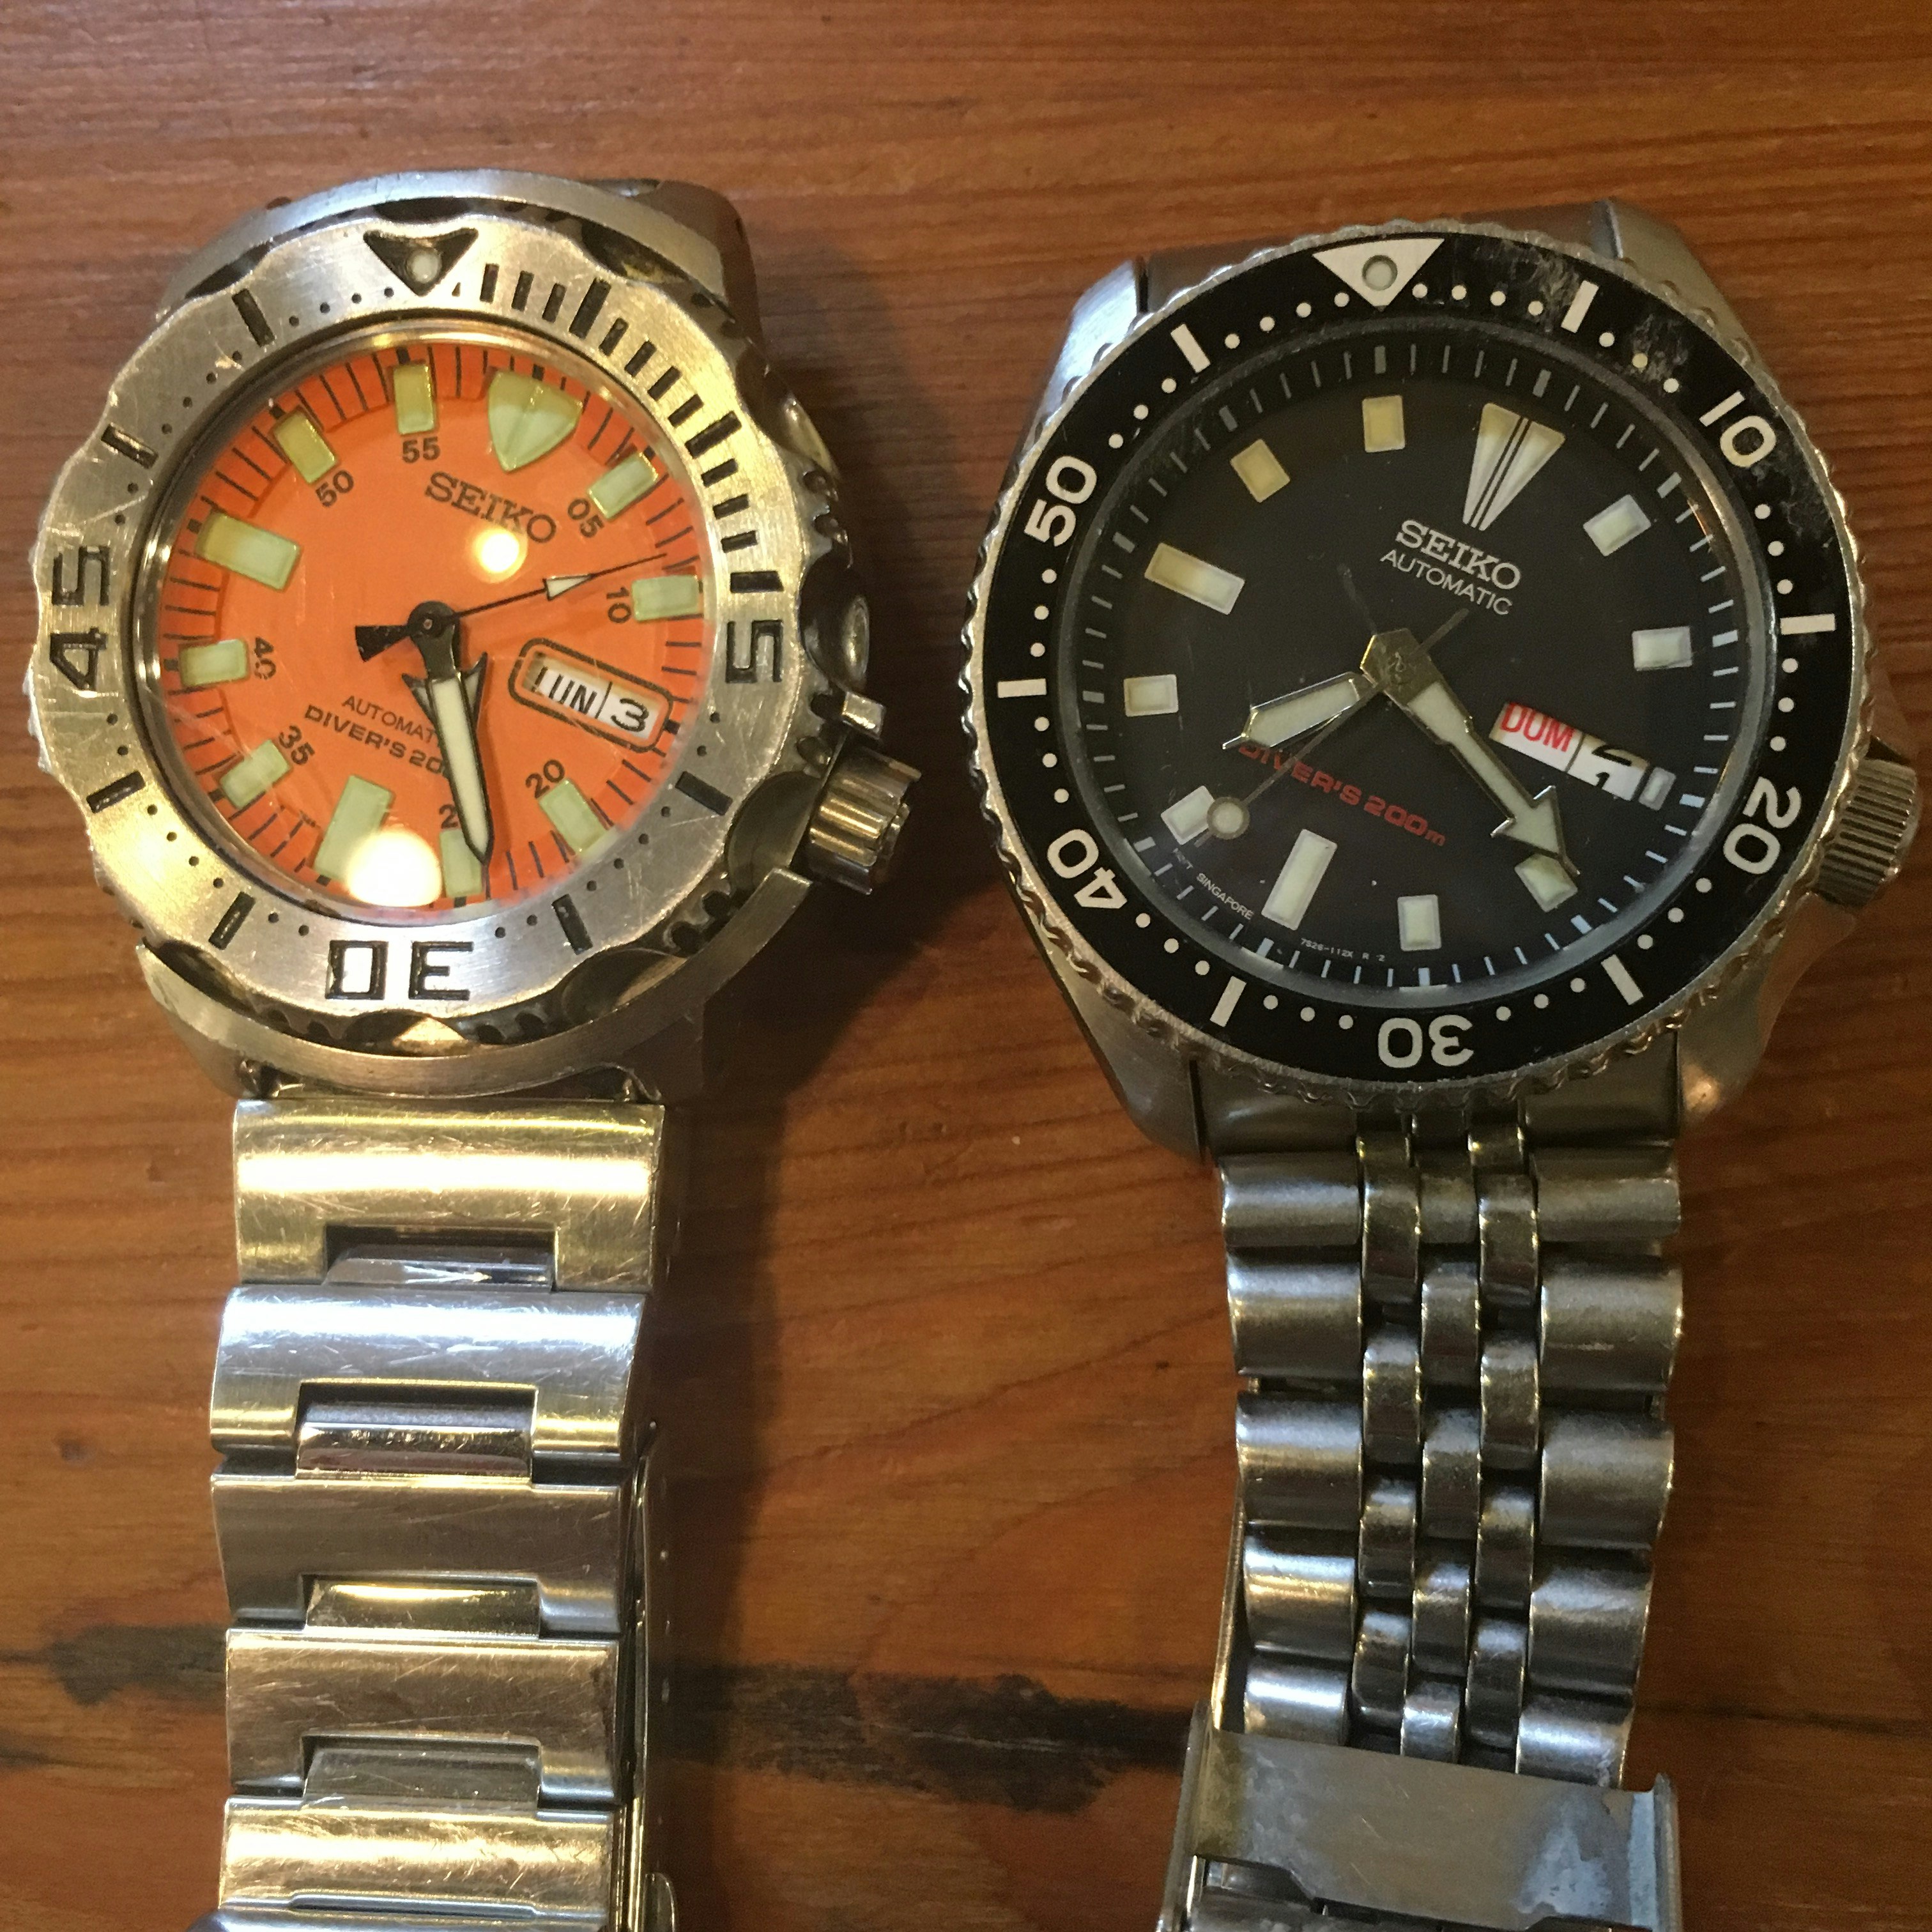 Seiko Authorized Repair Top Sellers, 51% OFF 